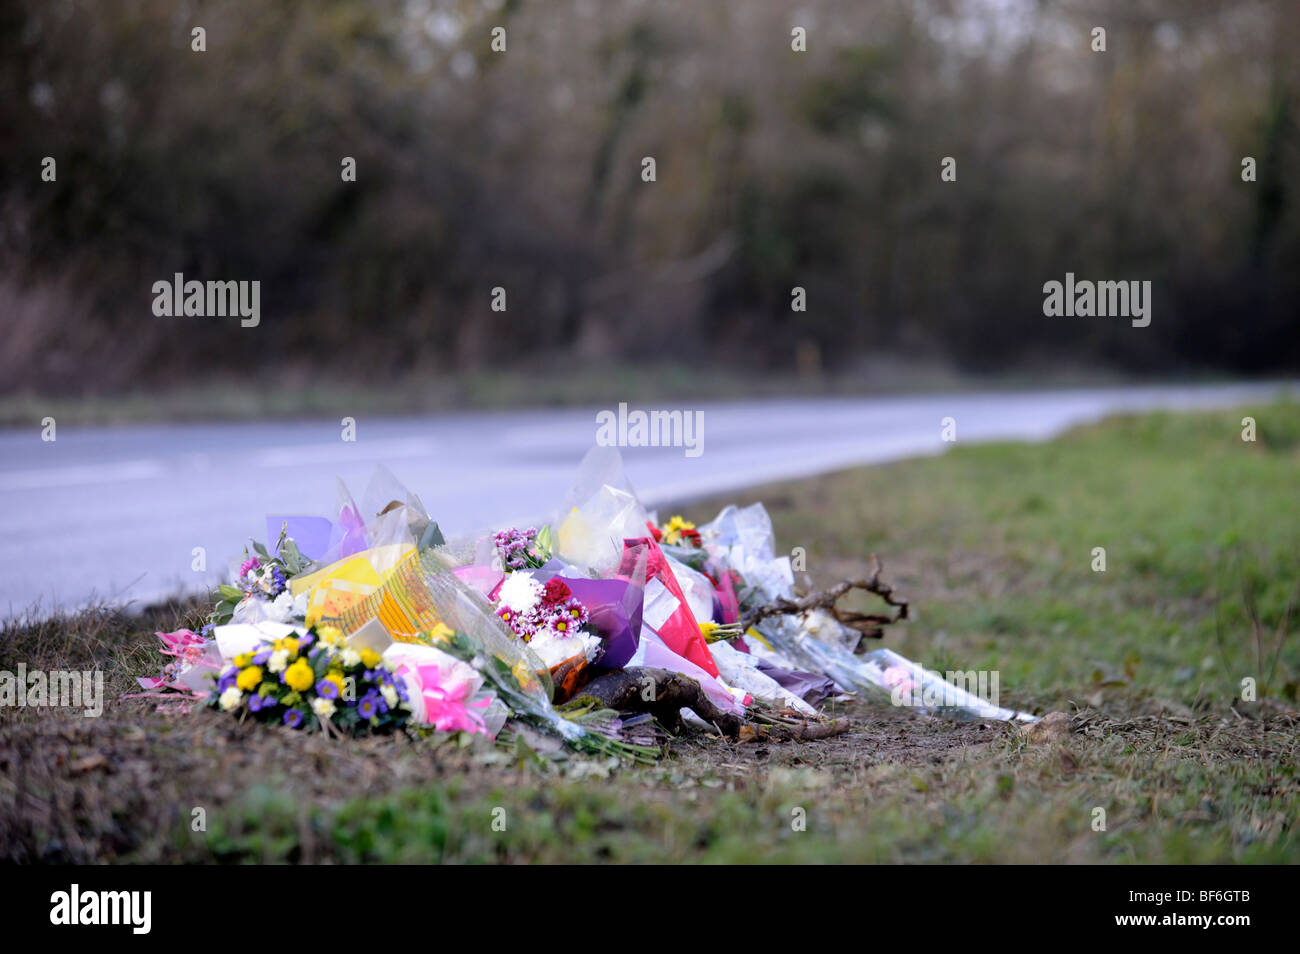 A roadside memorial on the A429 north of Stow-on-the-Wold, Gloucestershire where an accident on 7 March 2008 involving convicted Stock Photo